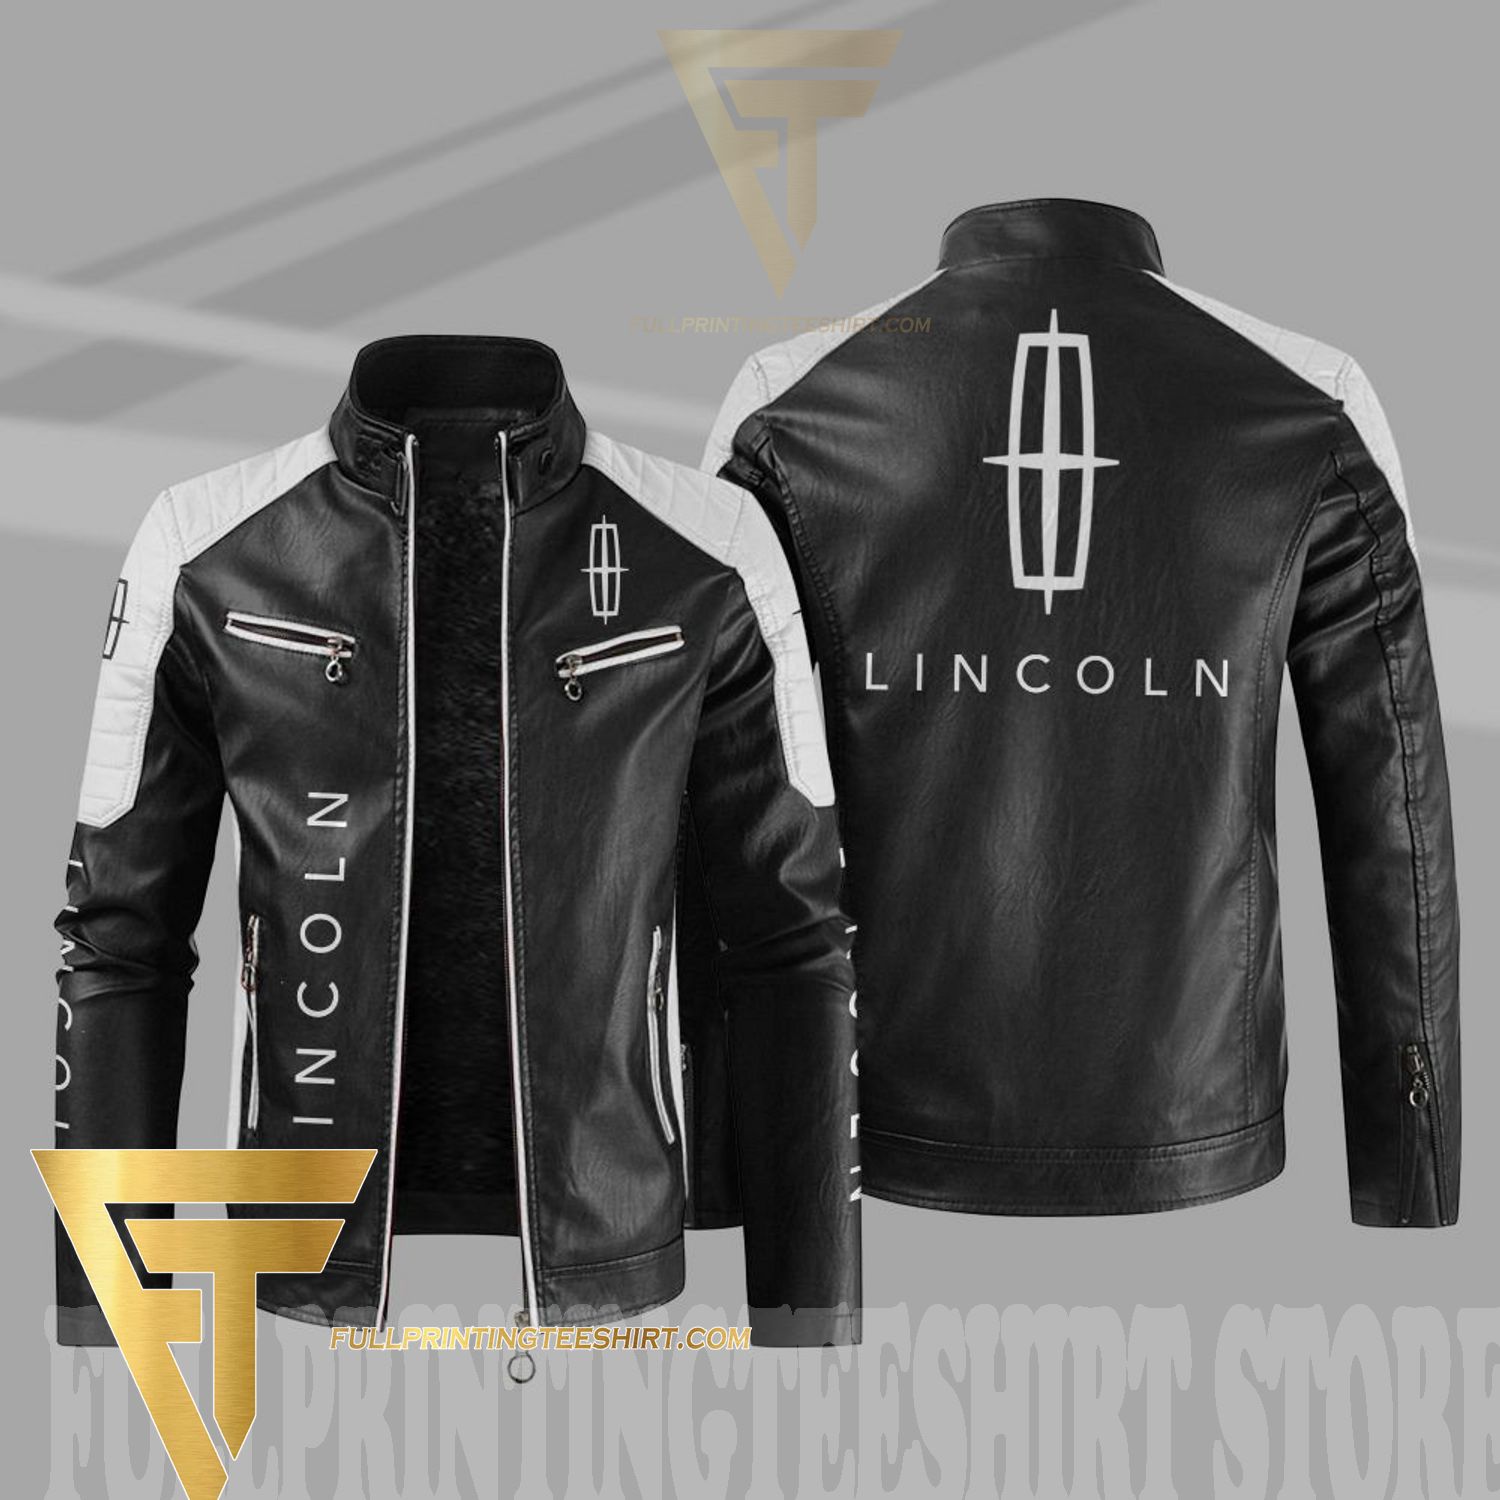 Top-selling item] Lincoln Symbol Jacket All Car Over Print